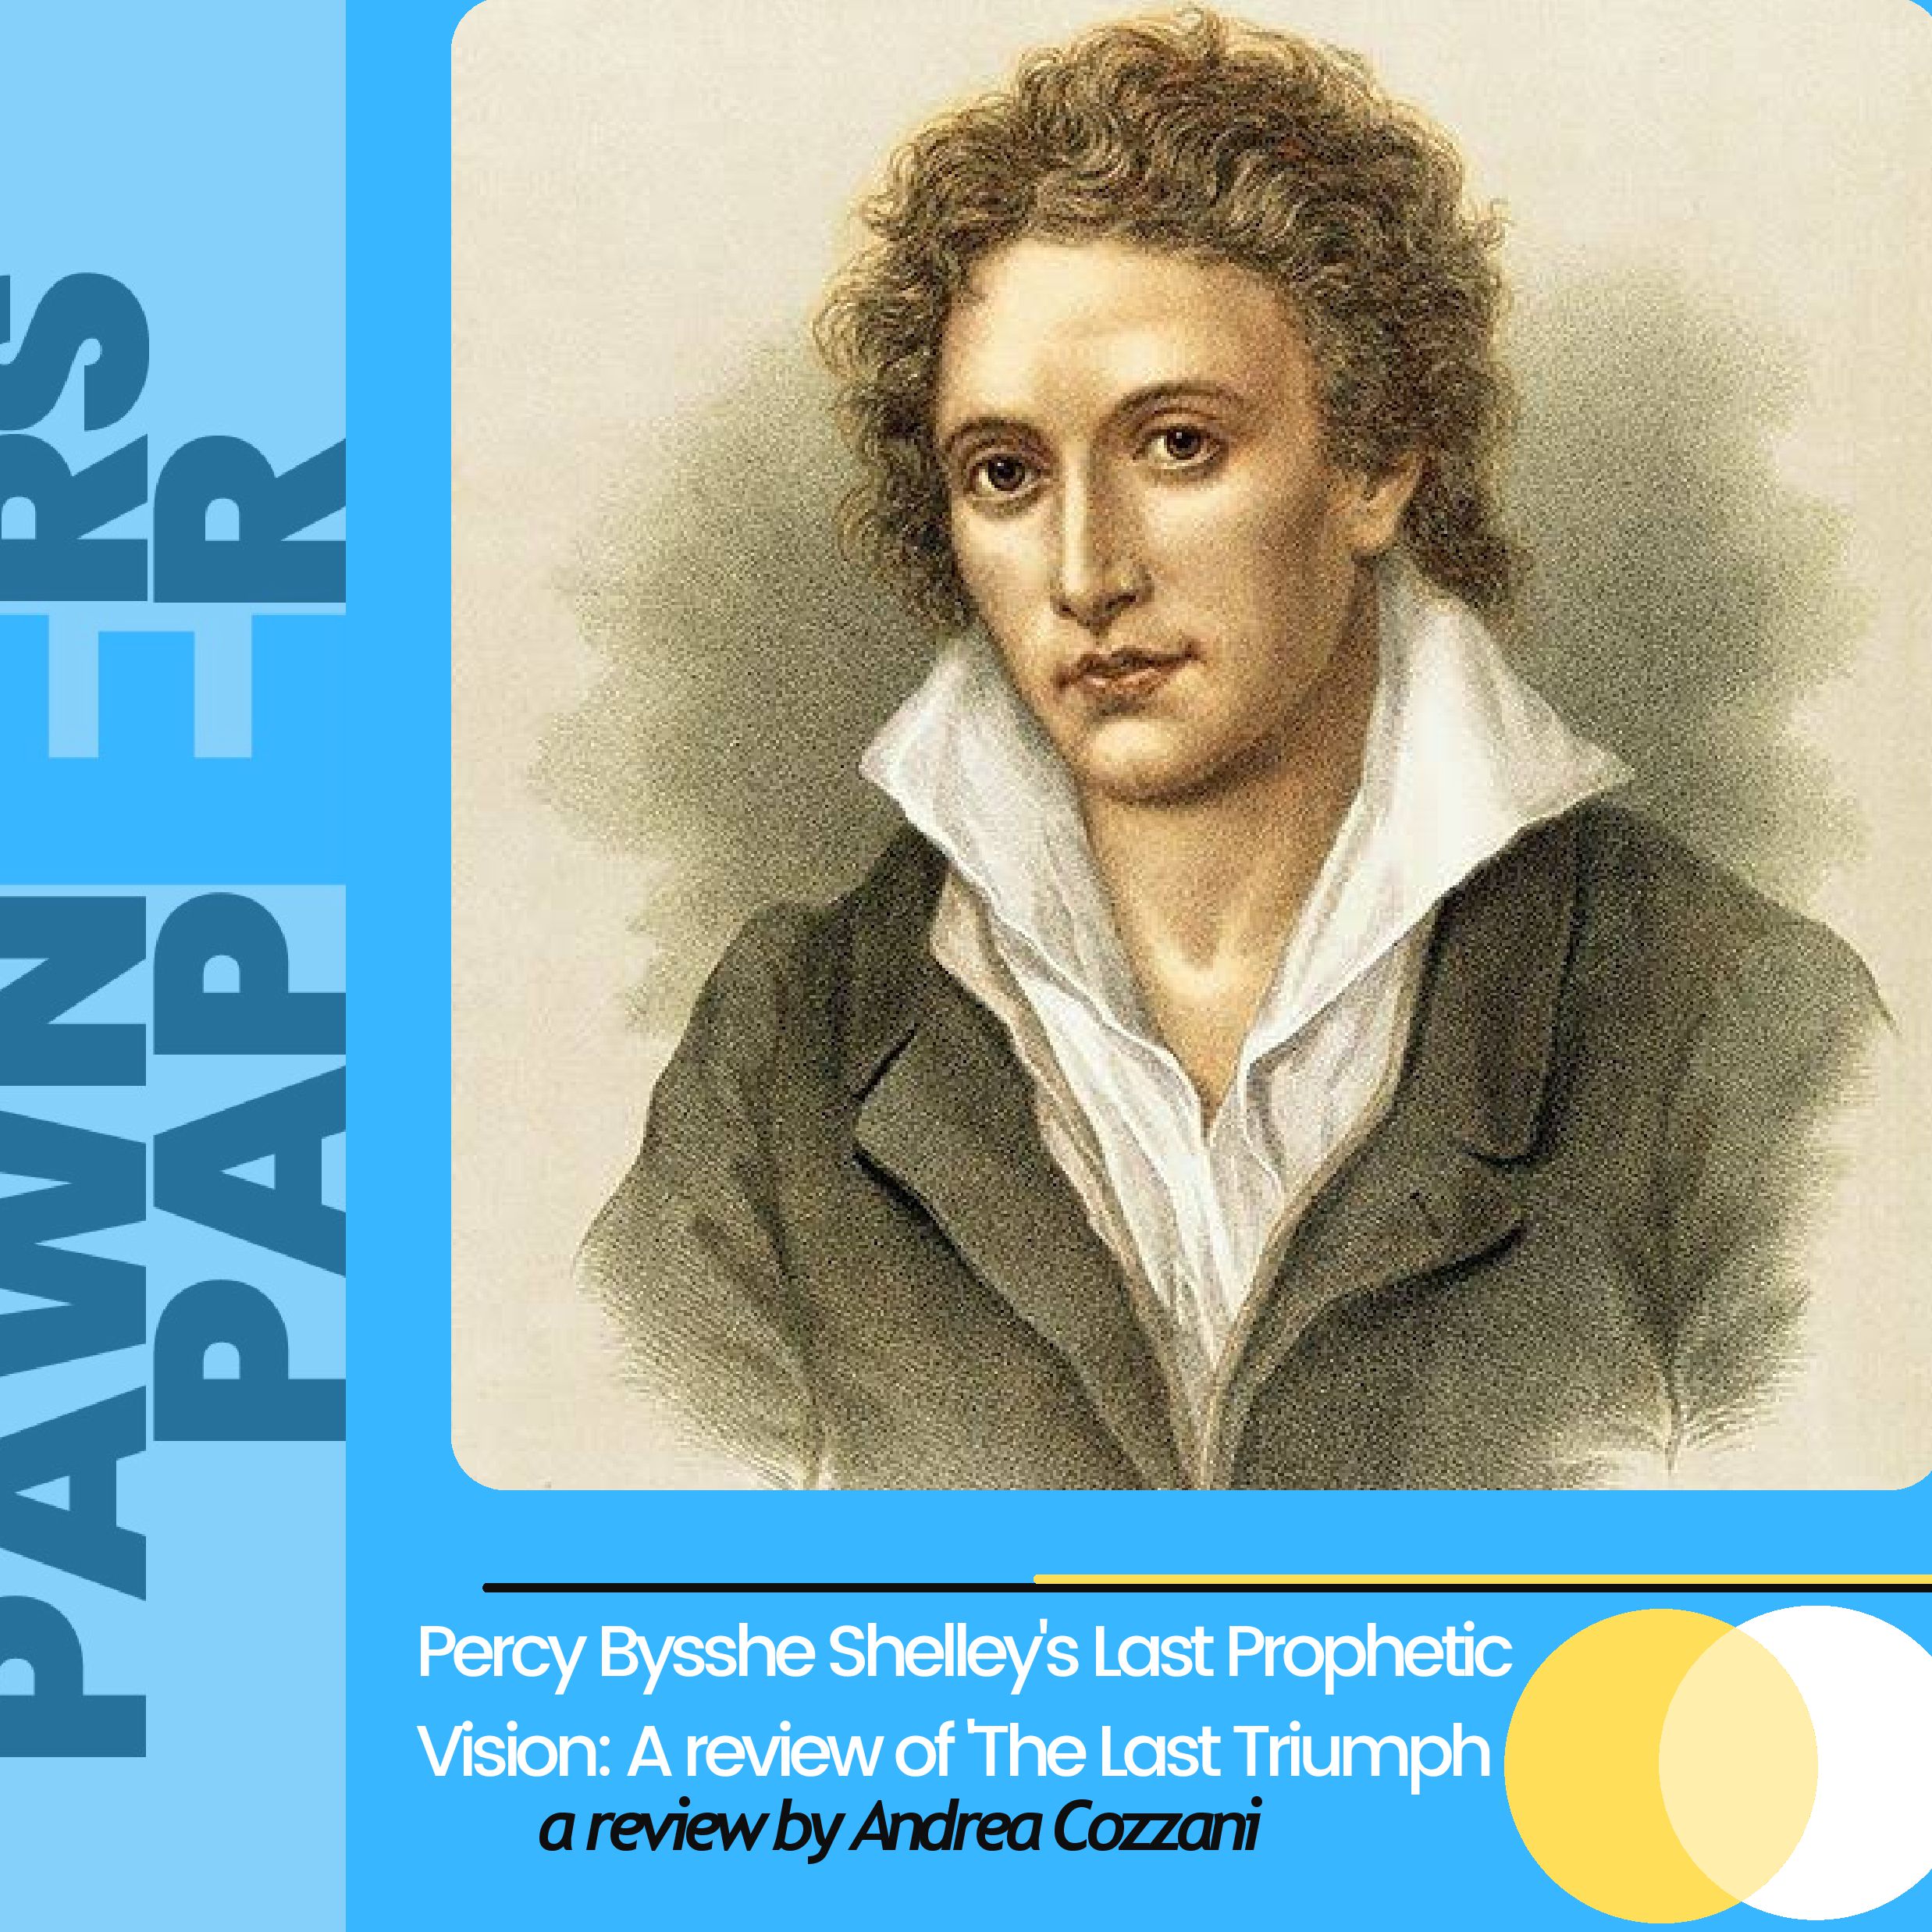 Percy Bysshe Shelley's Last Triumph